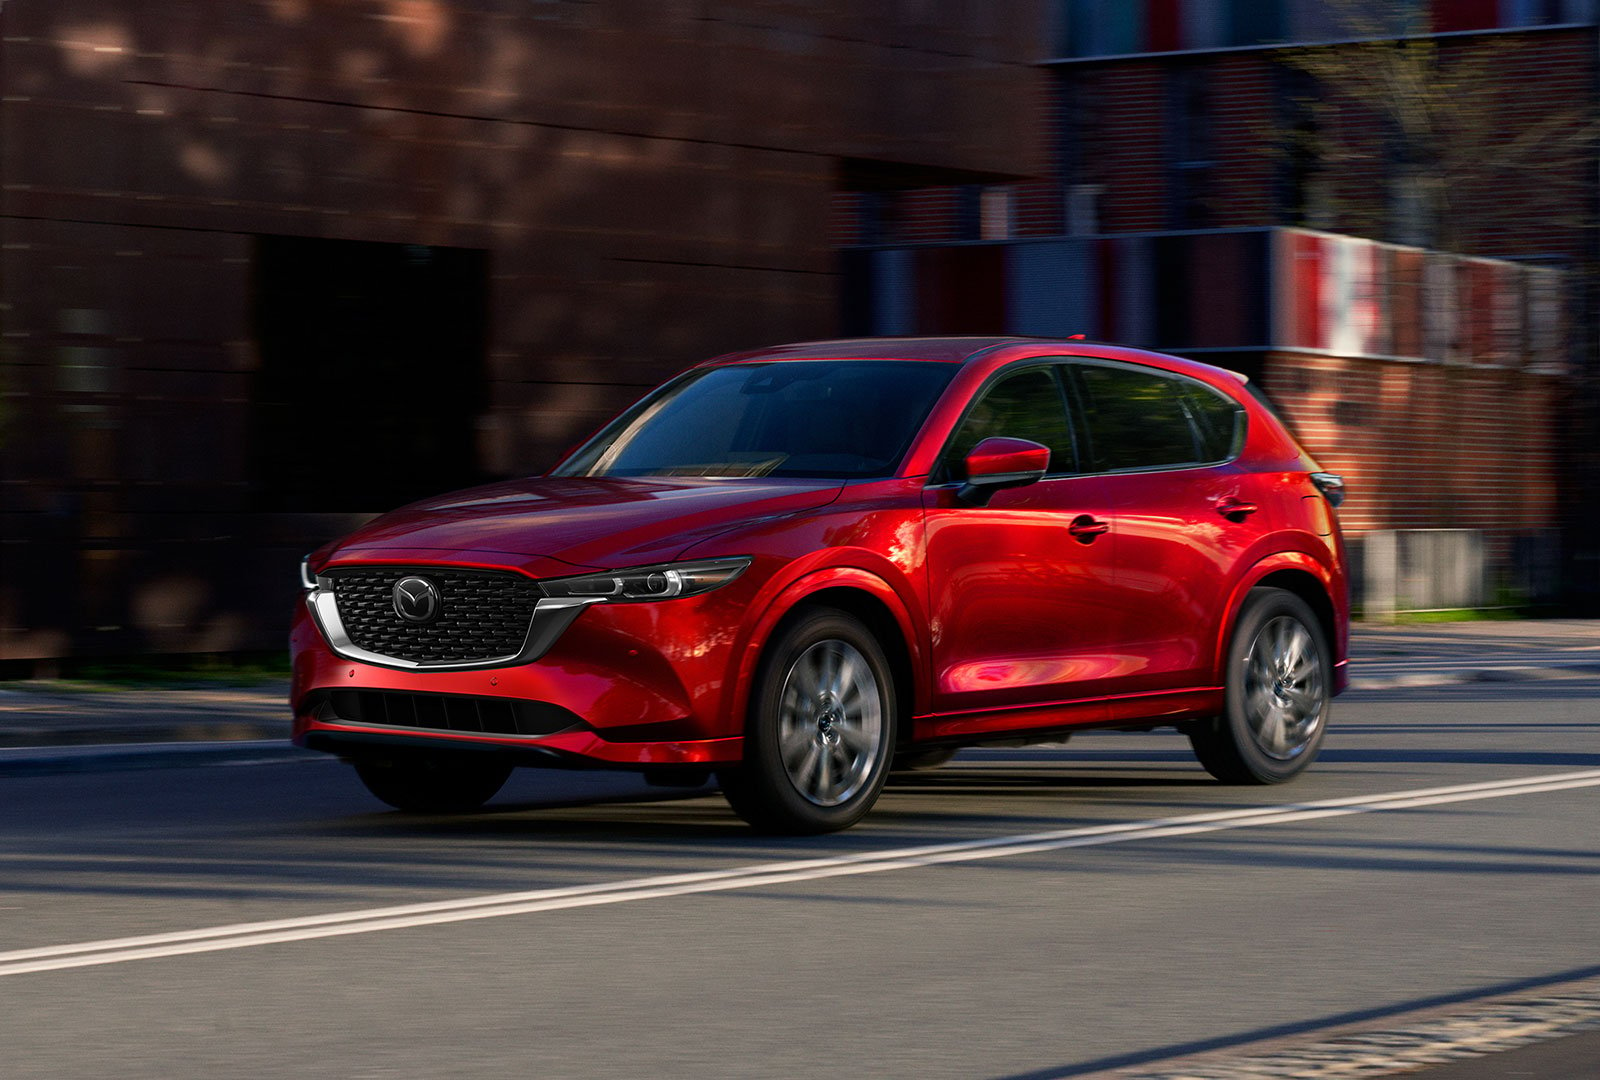 Soul Red Crystal Metallic Mazda CX-5 drives past blurred structures along urban street.